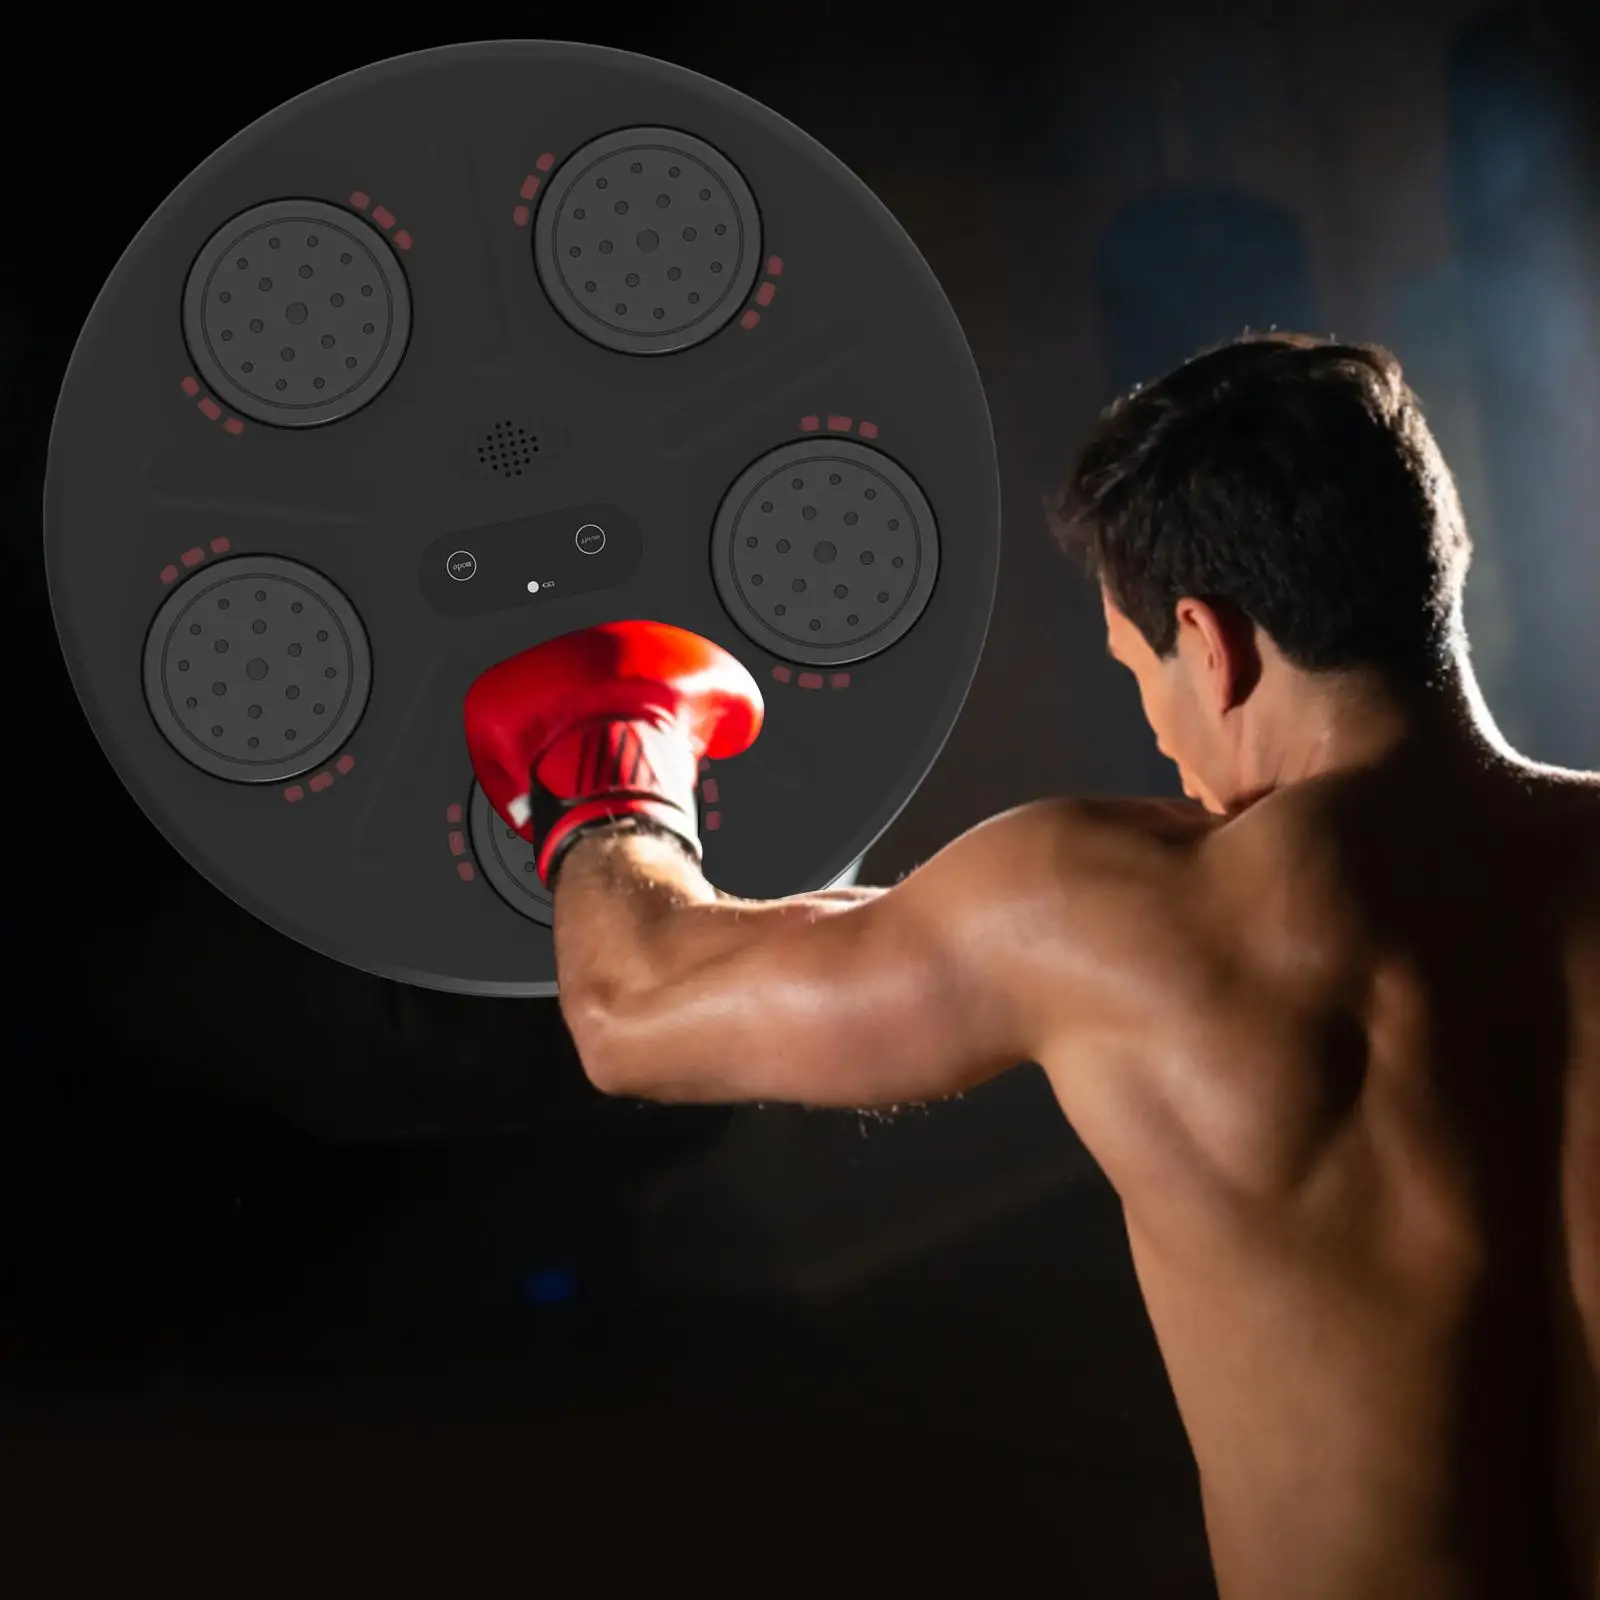 Smart Music Boxing Machine Wall Mounted Sports Workout Electronic Musical Target Response Coordination Reaction Improves Agility